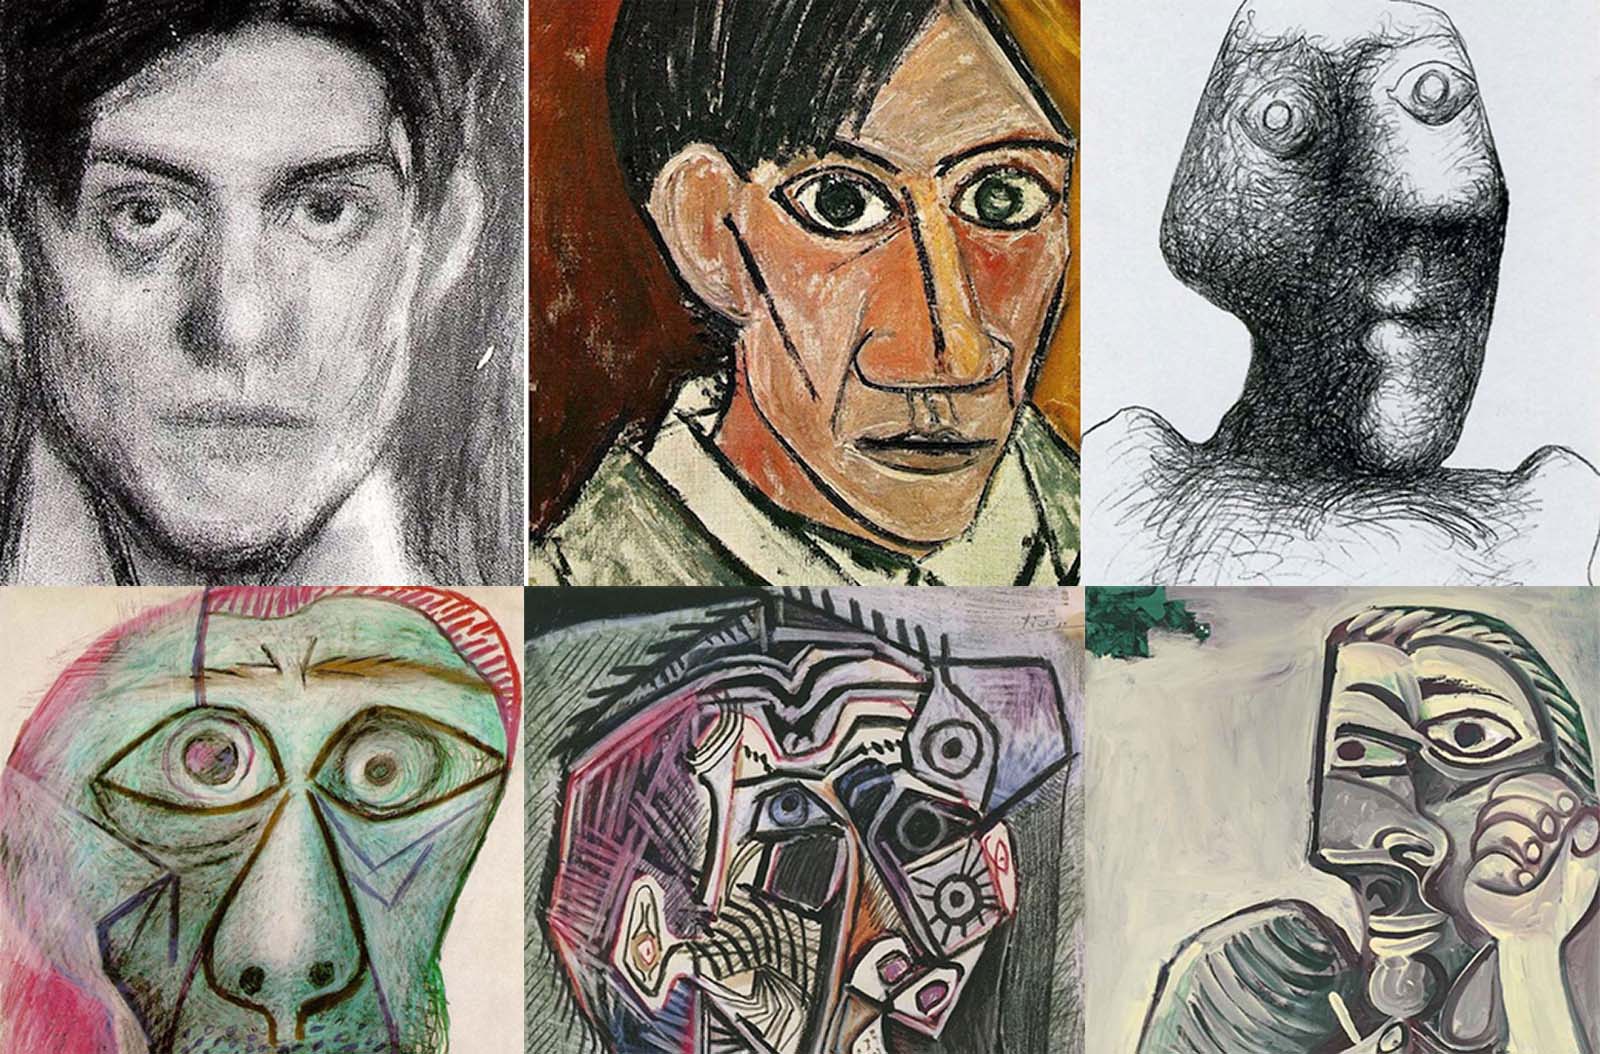 Picasso's self portrait evolution from age 15 to age 90 - Rare